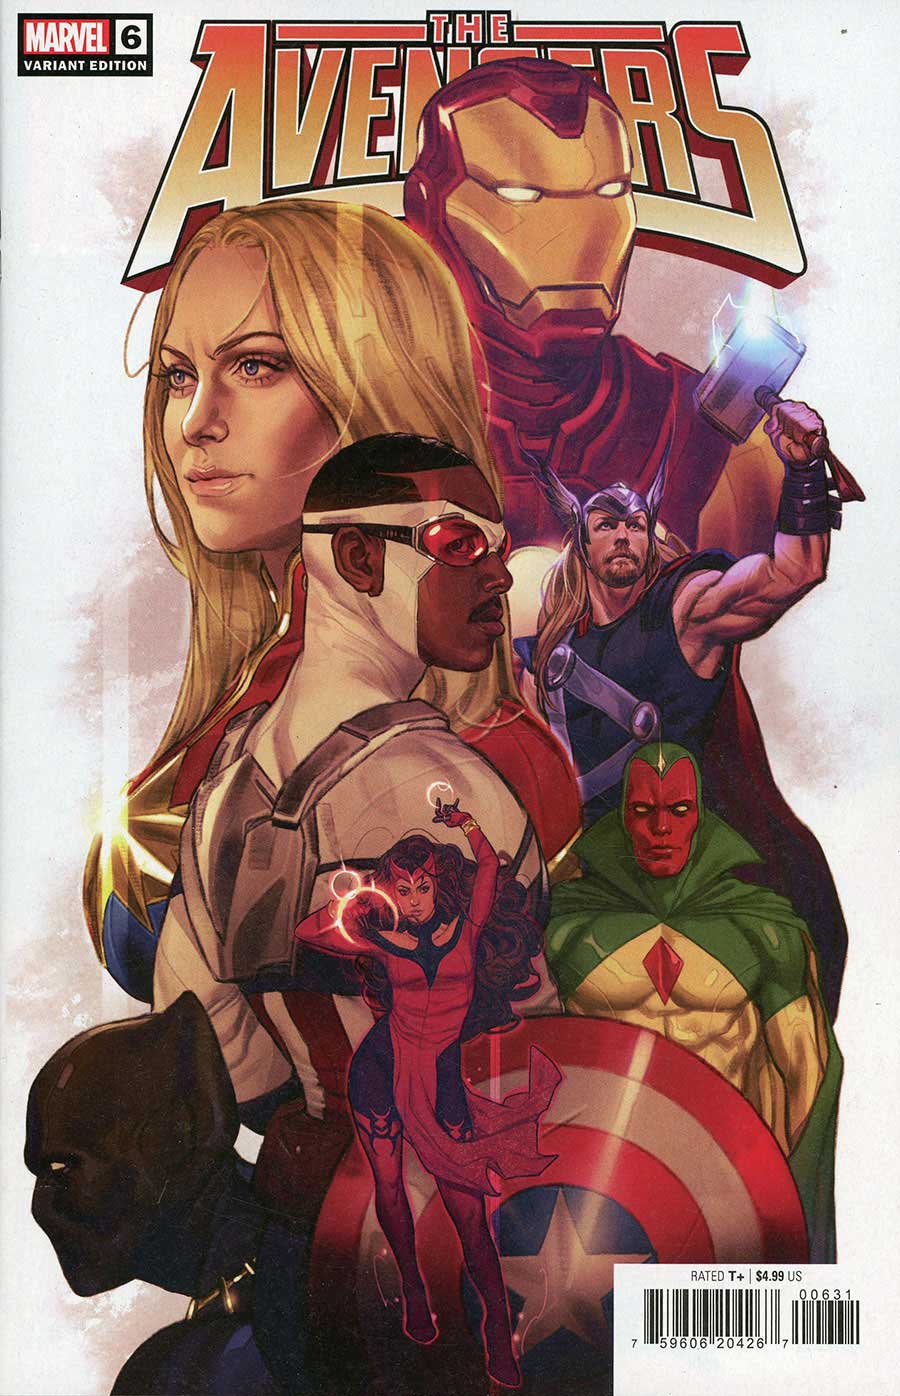 Avengers Vol 8 #6 Cover E Variant Joshua Sway Swaby Cover